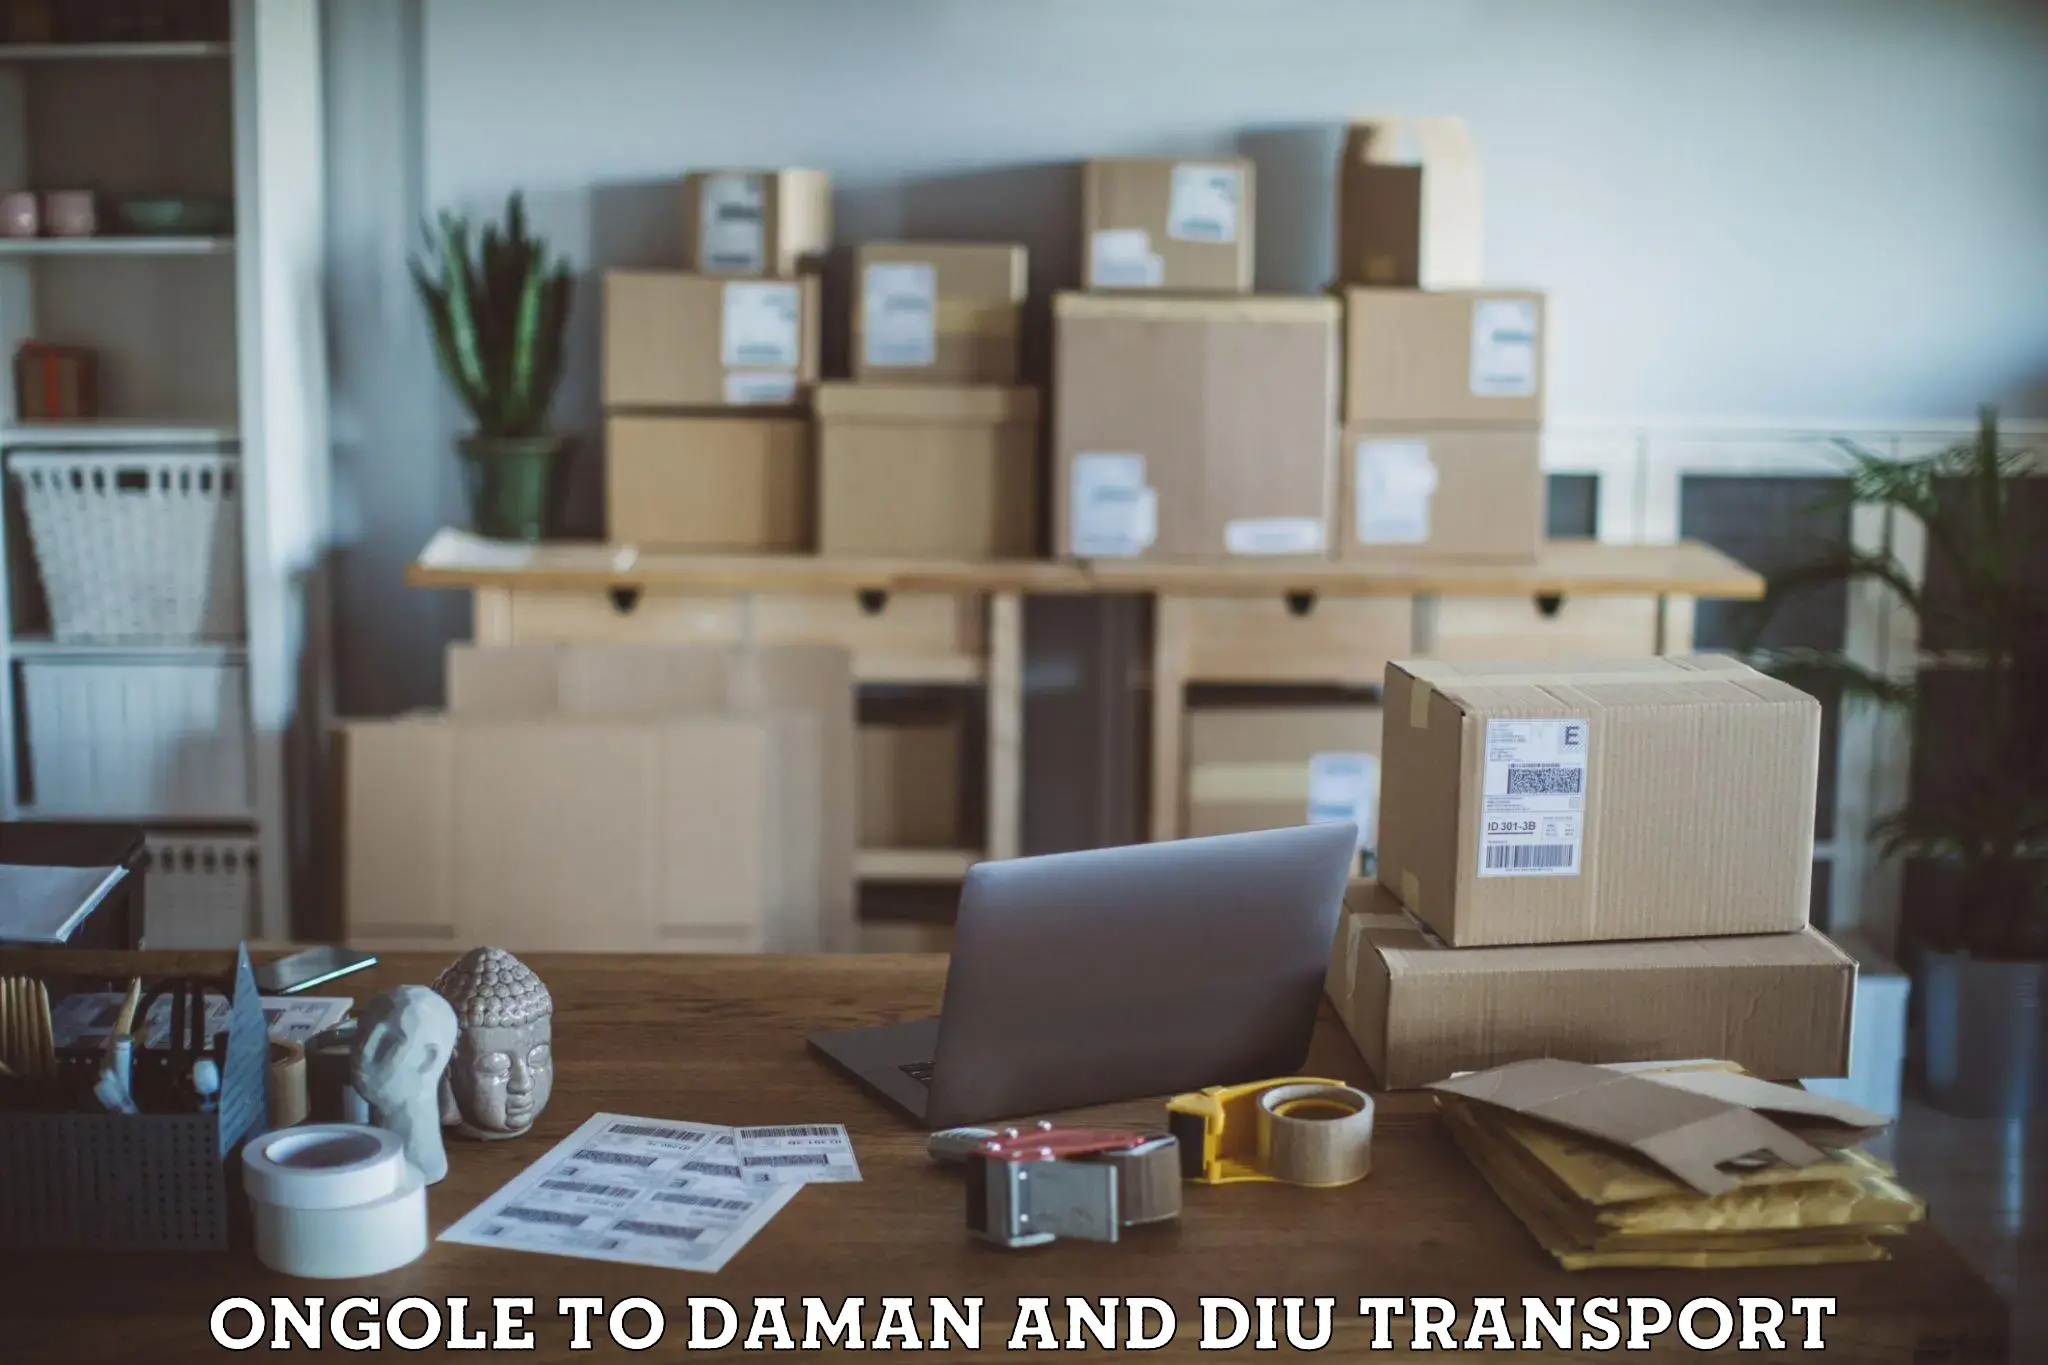 Transport shared services Ongole to Daman and Diu